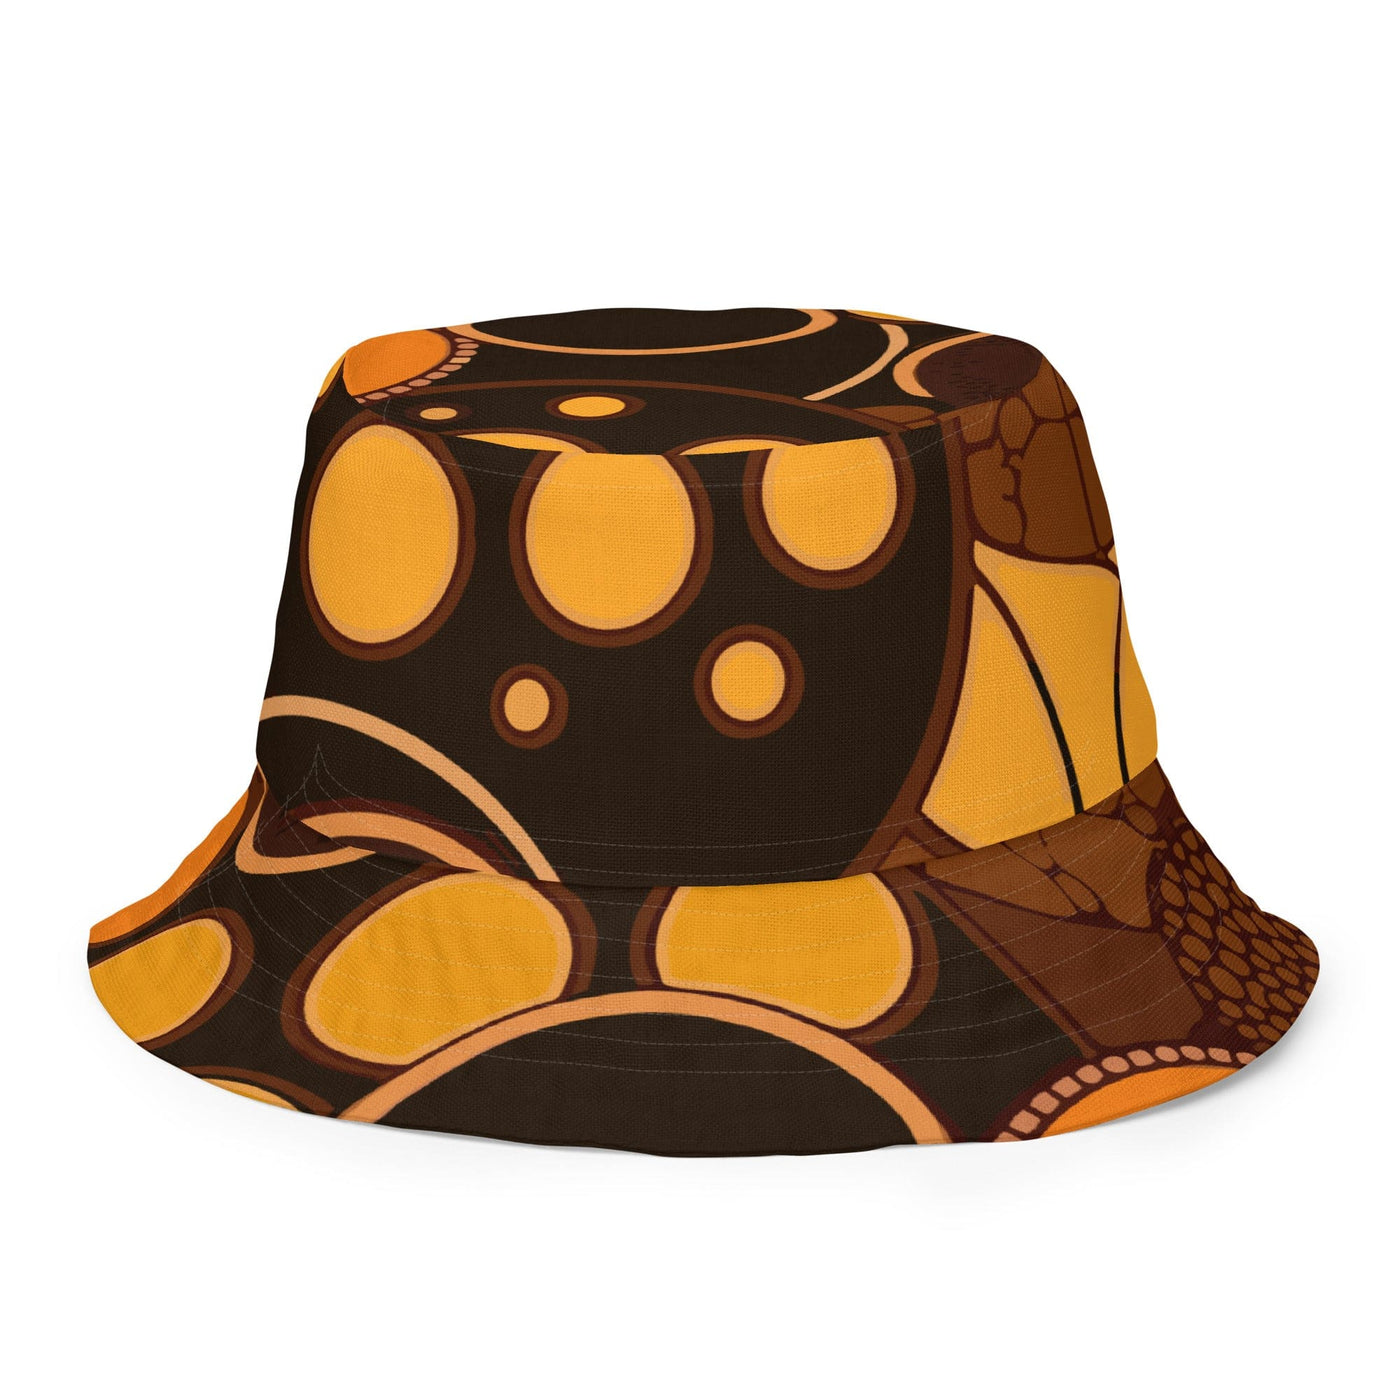 Reversible Bucket Hat Orange And Brown Spotted Illustration